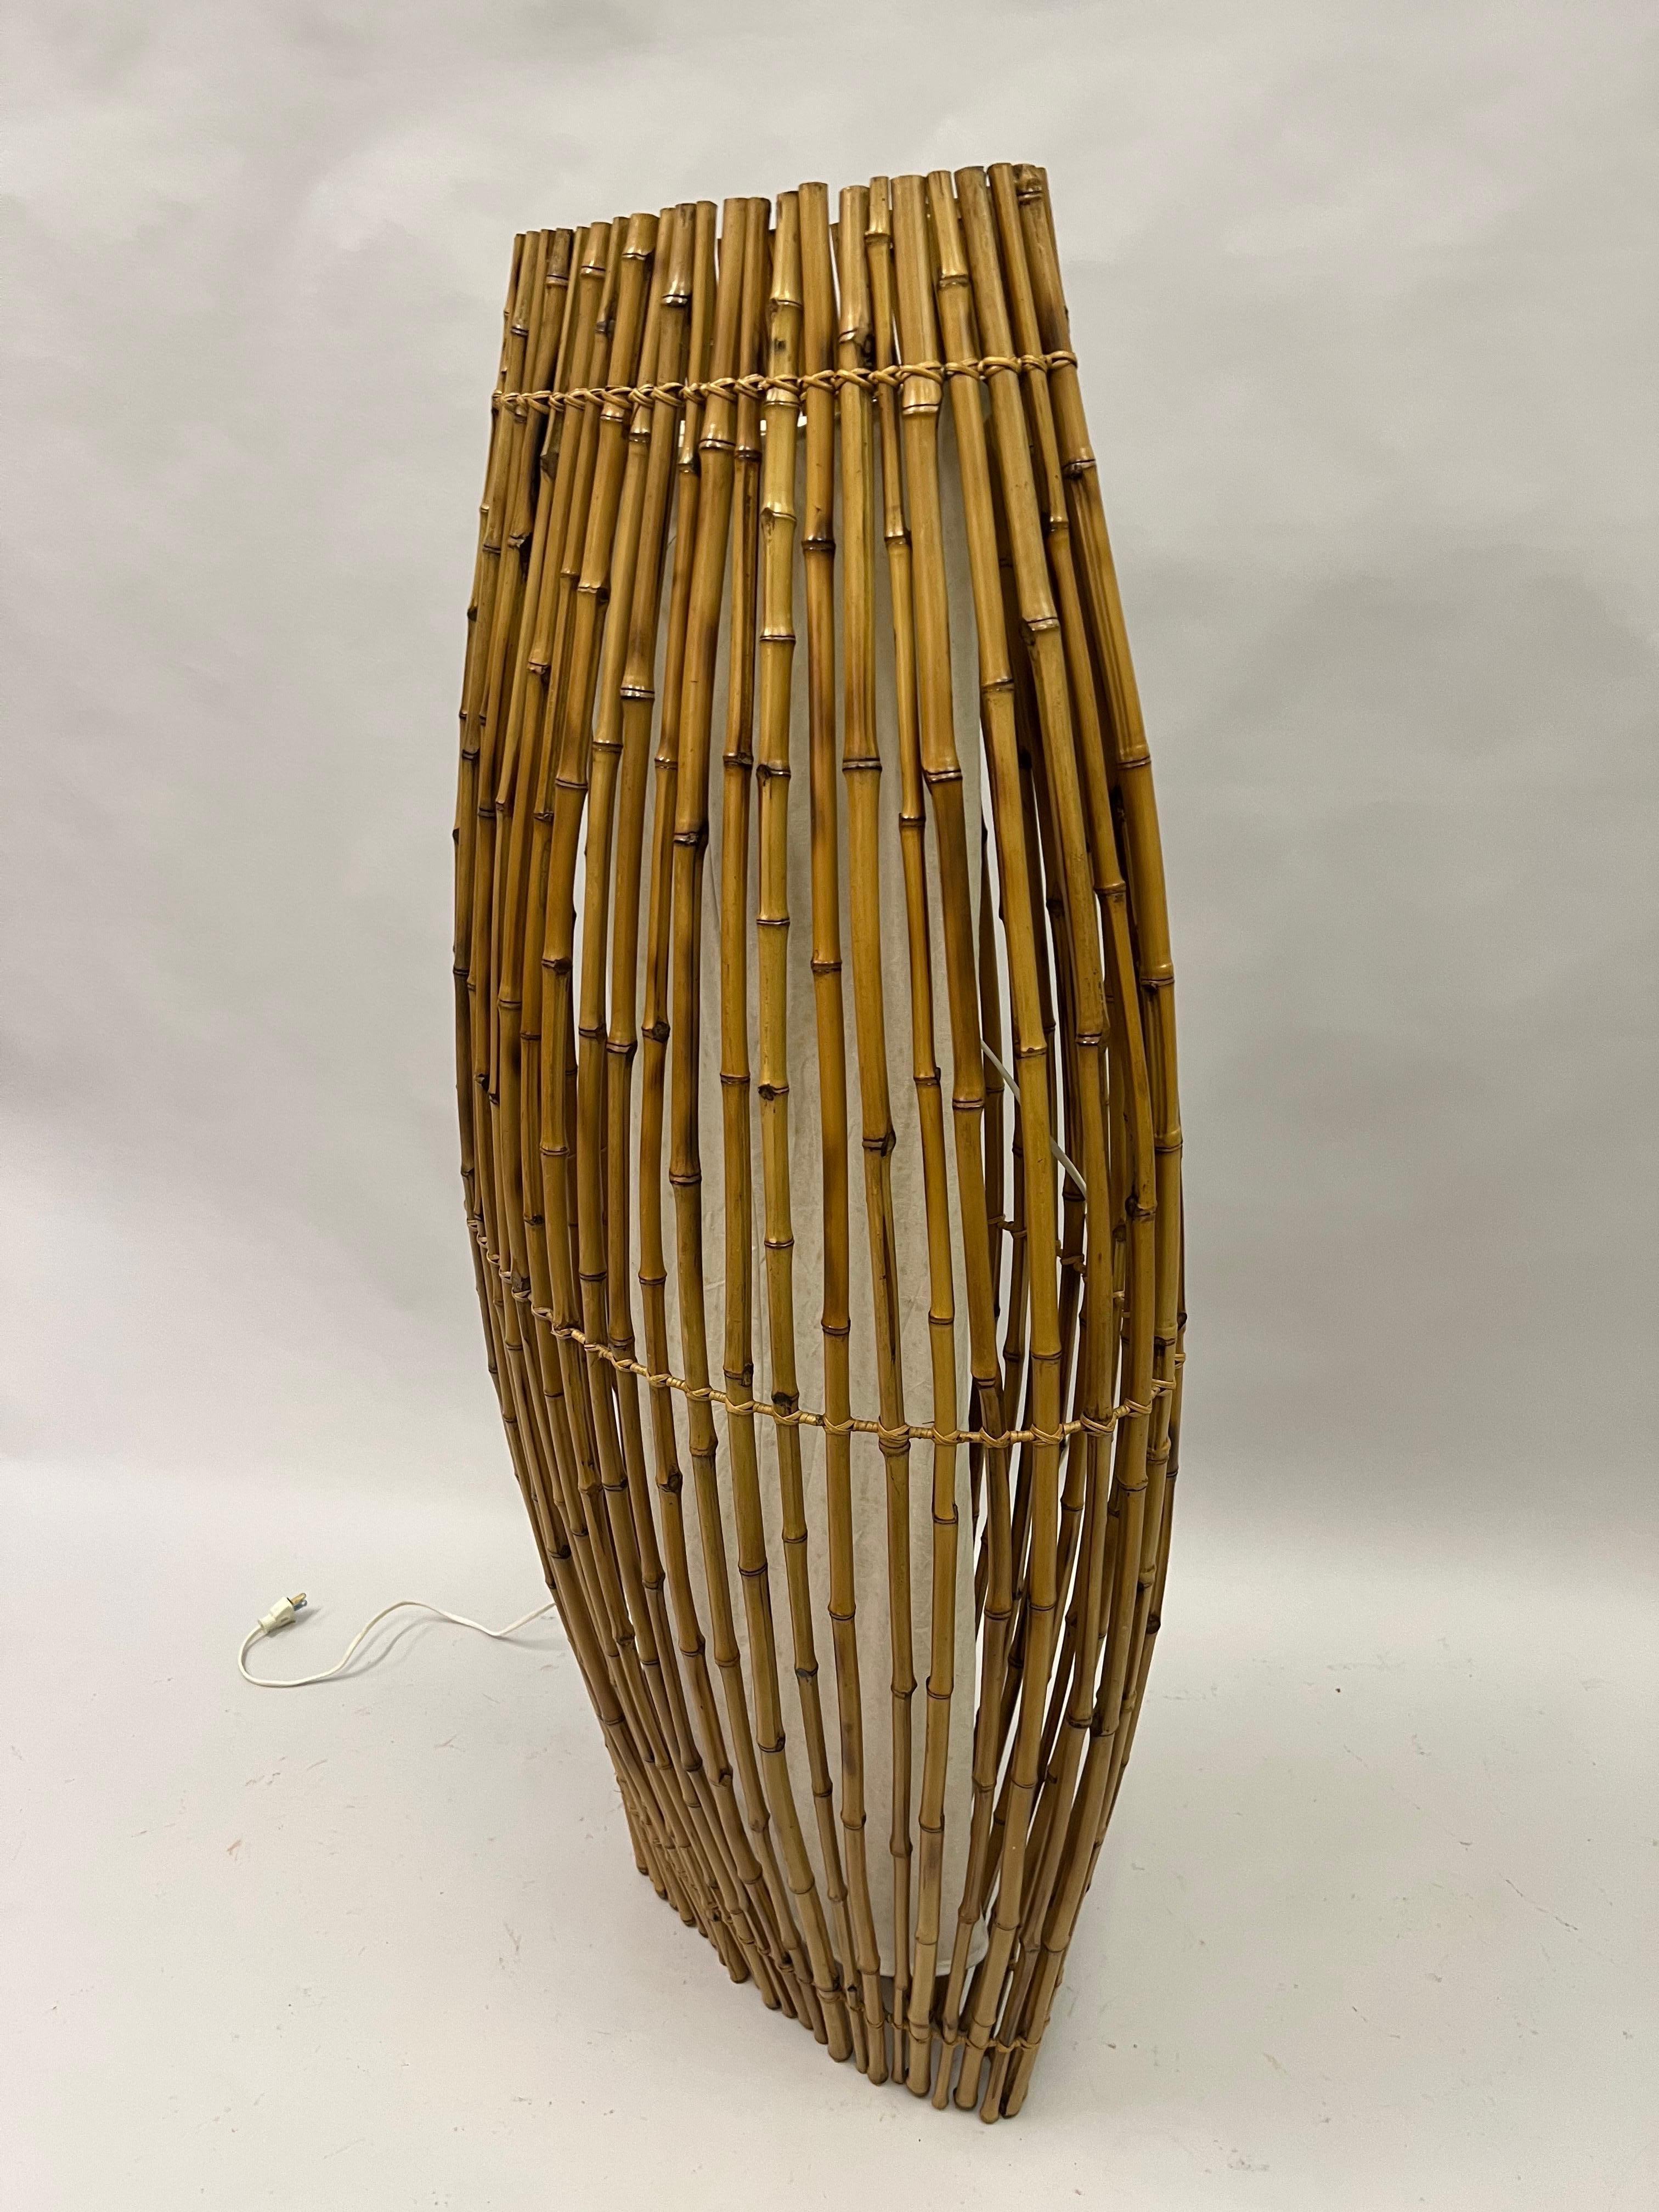 A Magical, Rare French Mid-Century Modern Craftsman Floor Lamp / Light Sculpture in Rattan Attributed to Janine Abraham and Dirk Jan Roi. This minimalist sculpture reflects 1960's culture with its pure, natural aesthetic that was an integral part of